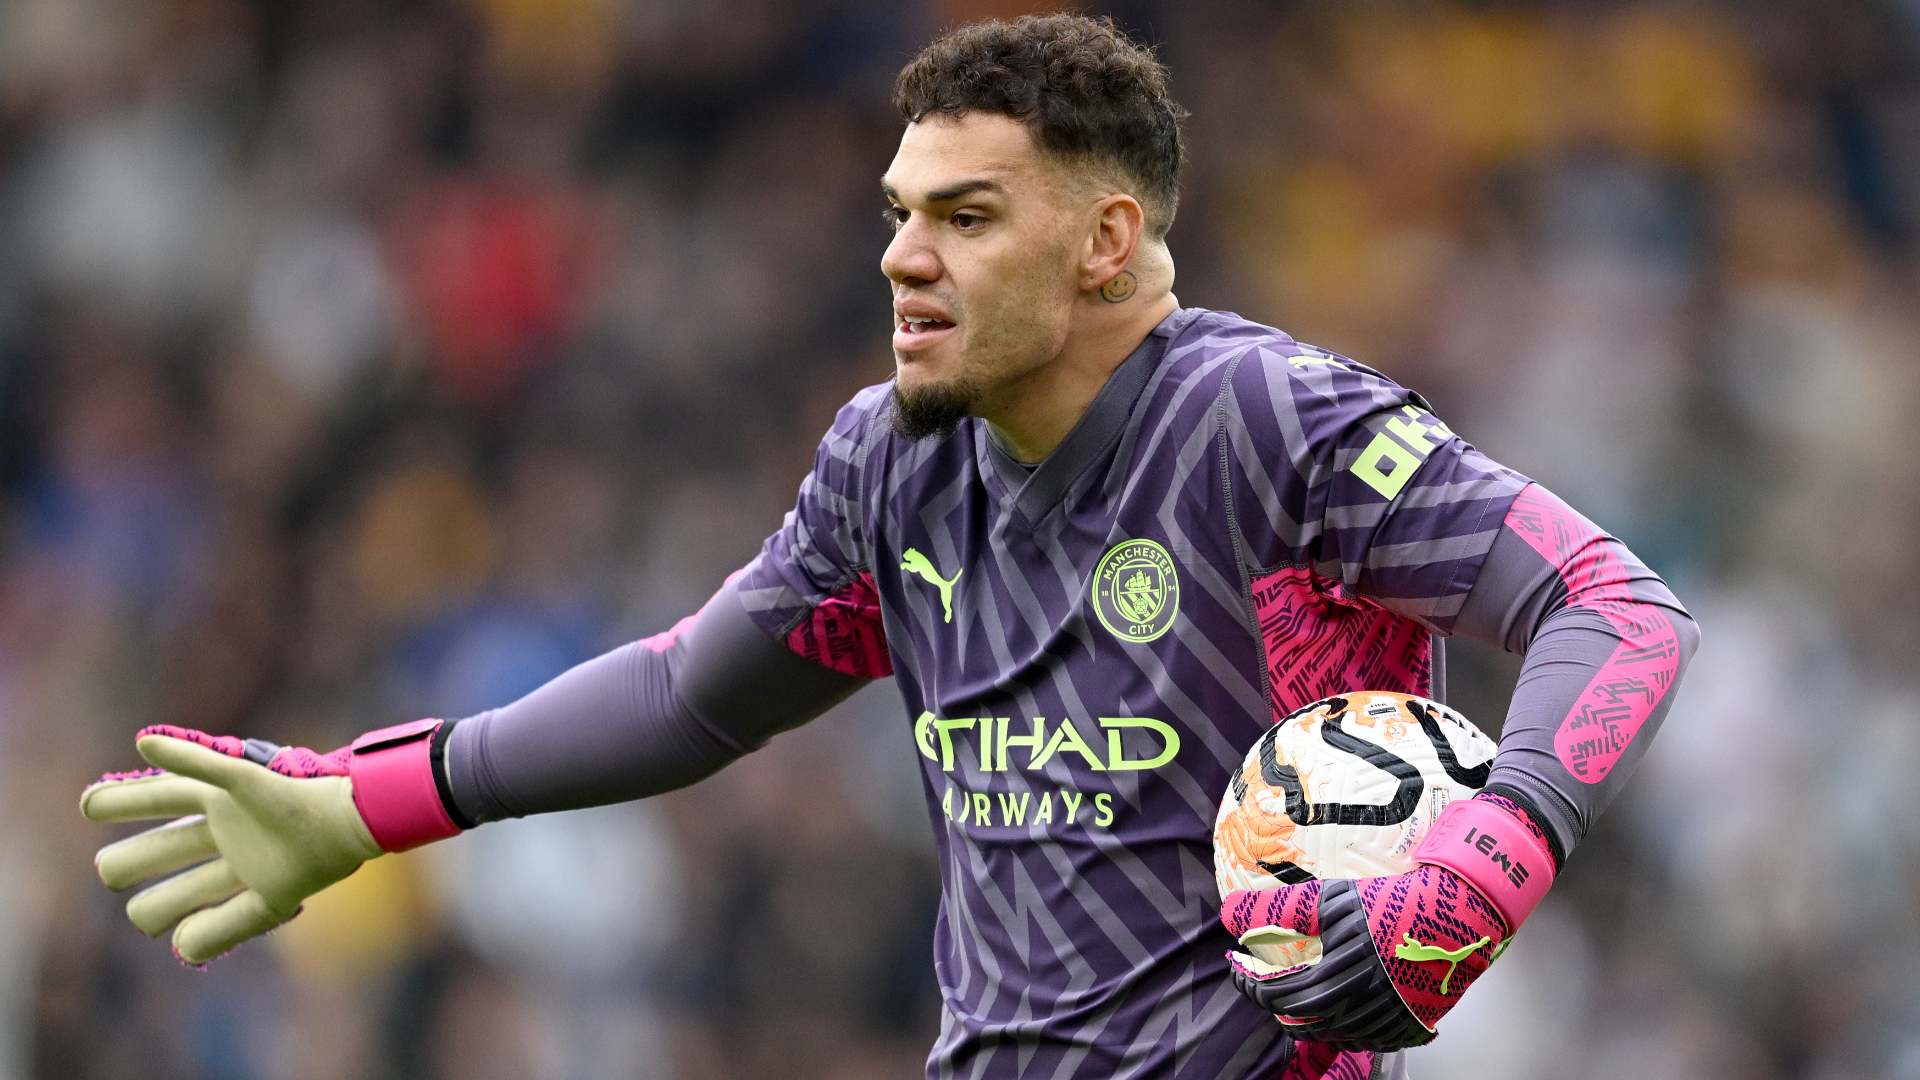 Ake and Ederson return as City make two changes for Champions